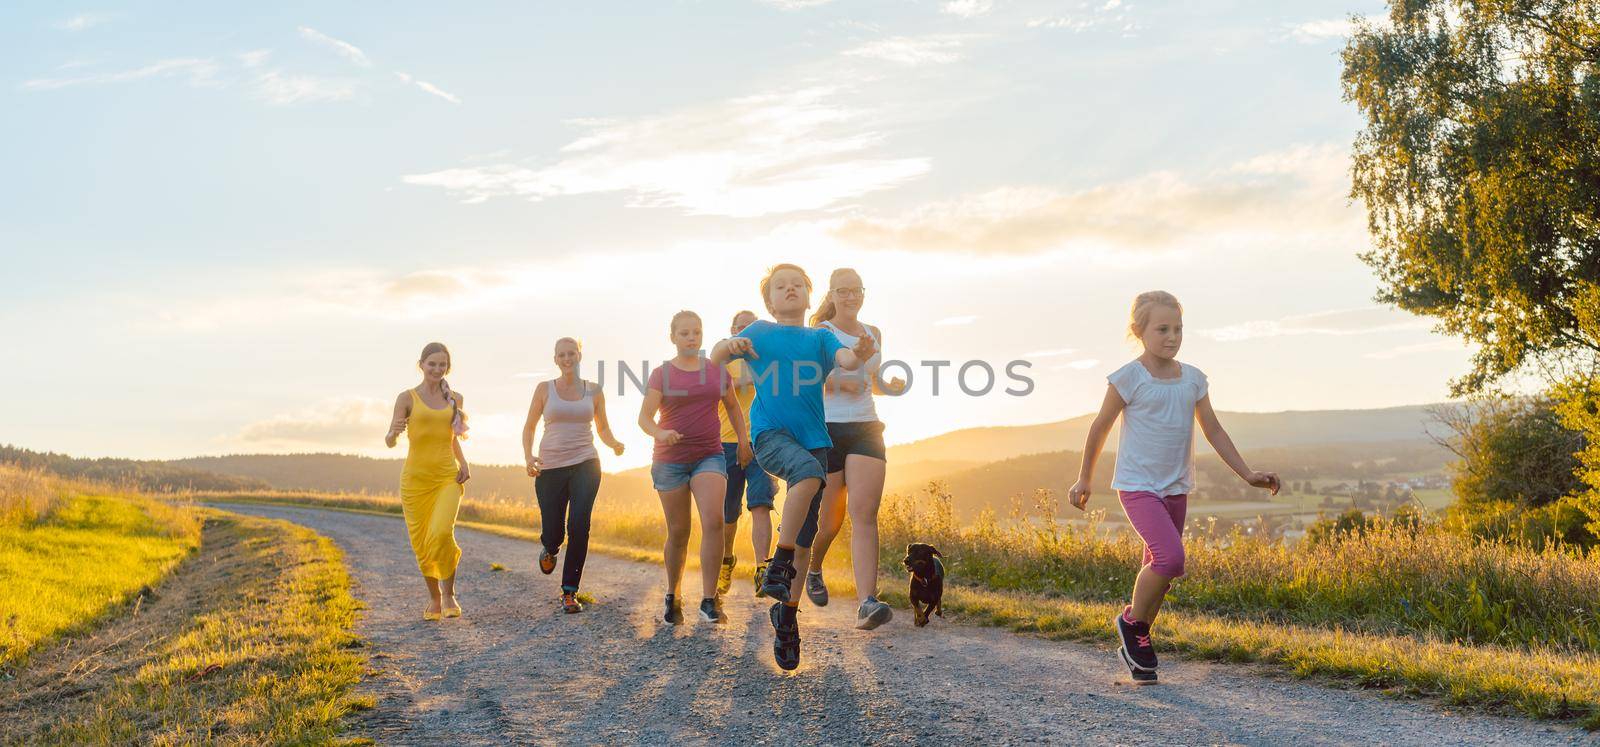 Playful family running and playing on a path in backlit summer landscape